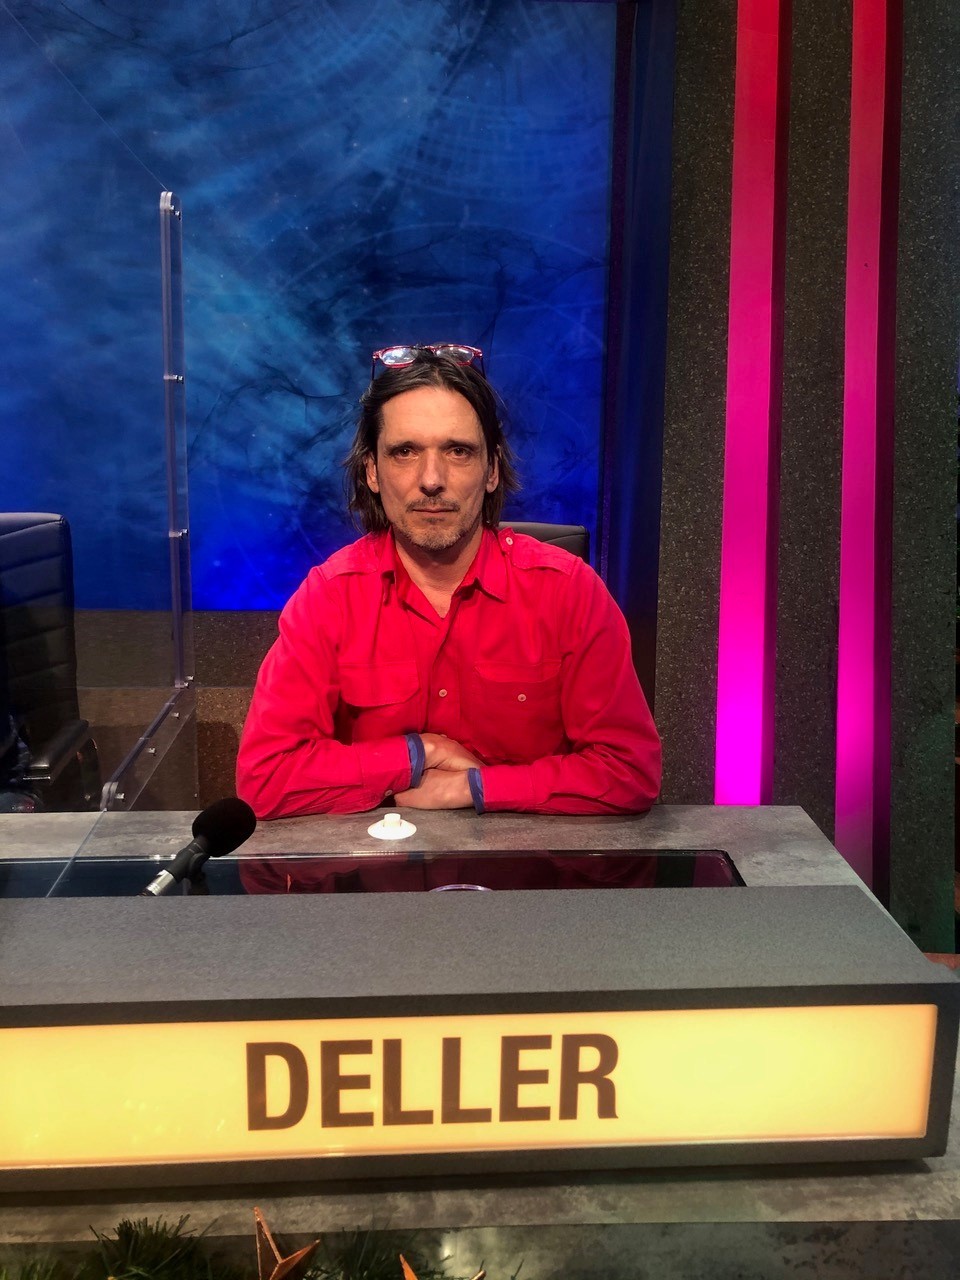 Jeremy Deller competing in the Final of University Challenge Christmas 2020, representing the Courtauld Institute of Art, where he studied Art History